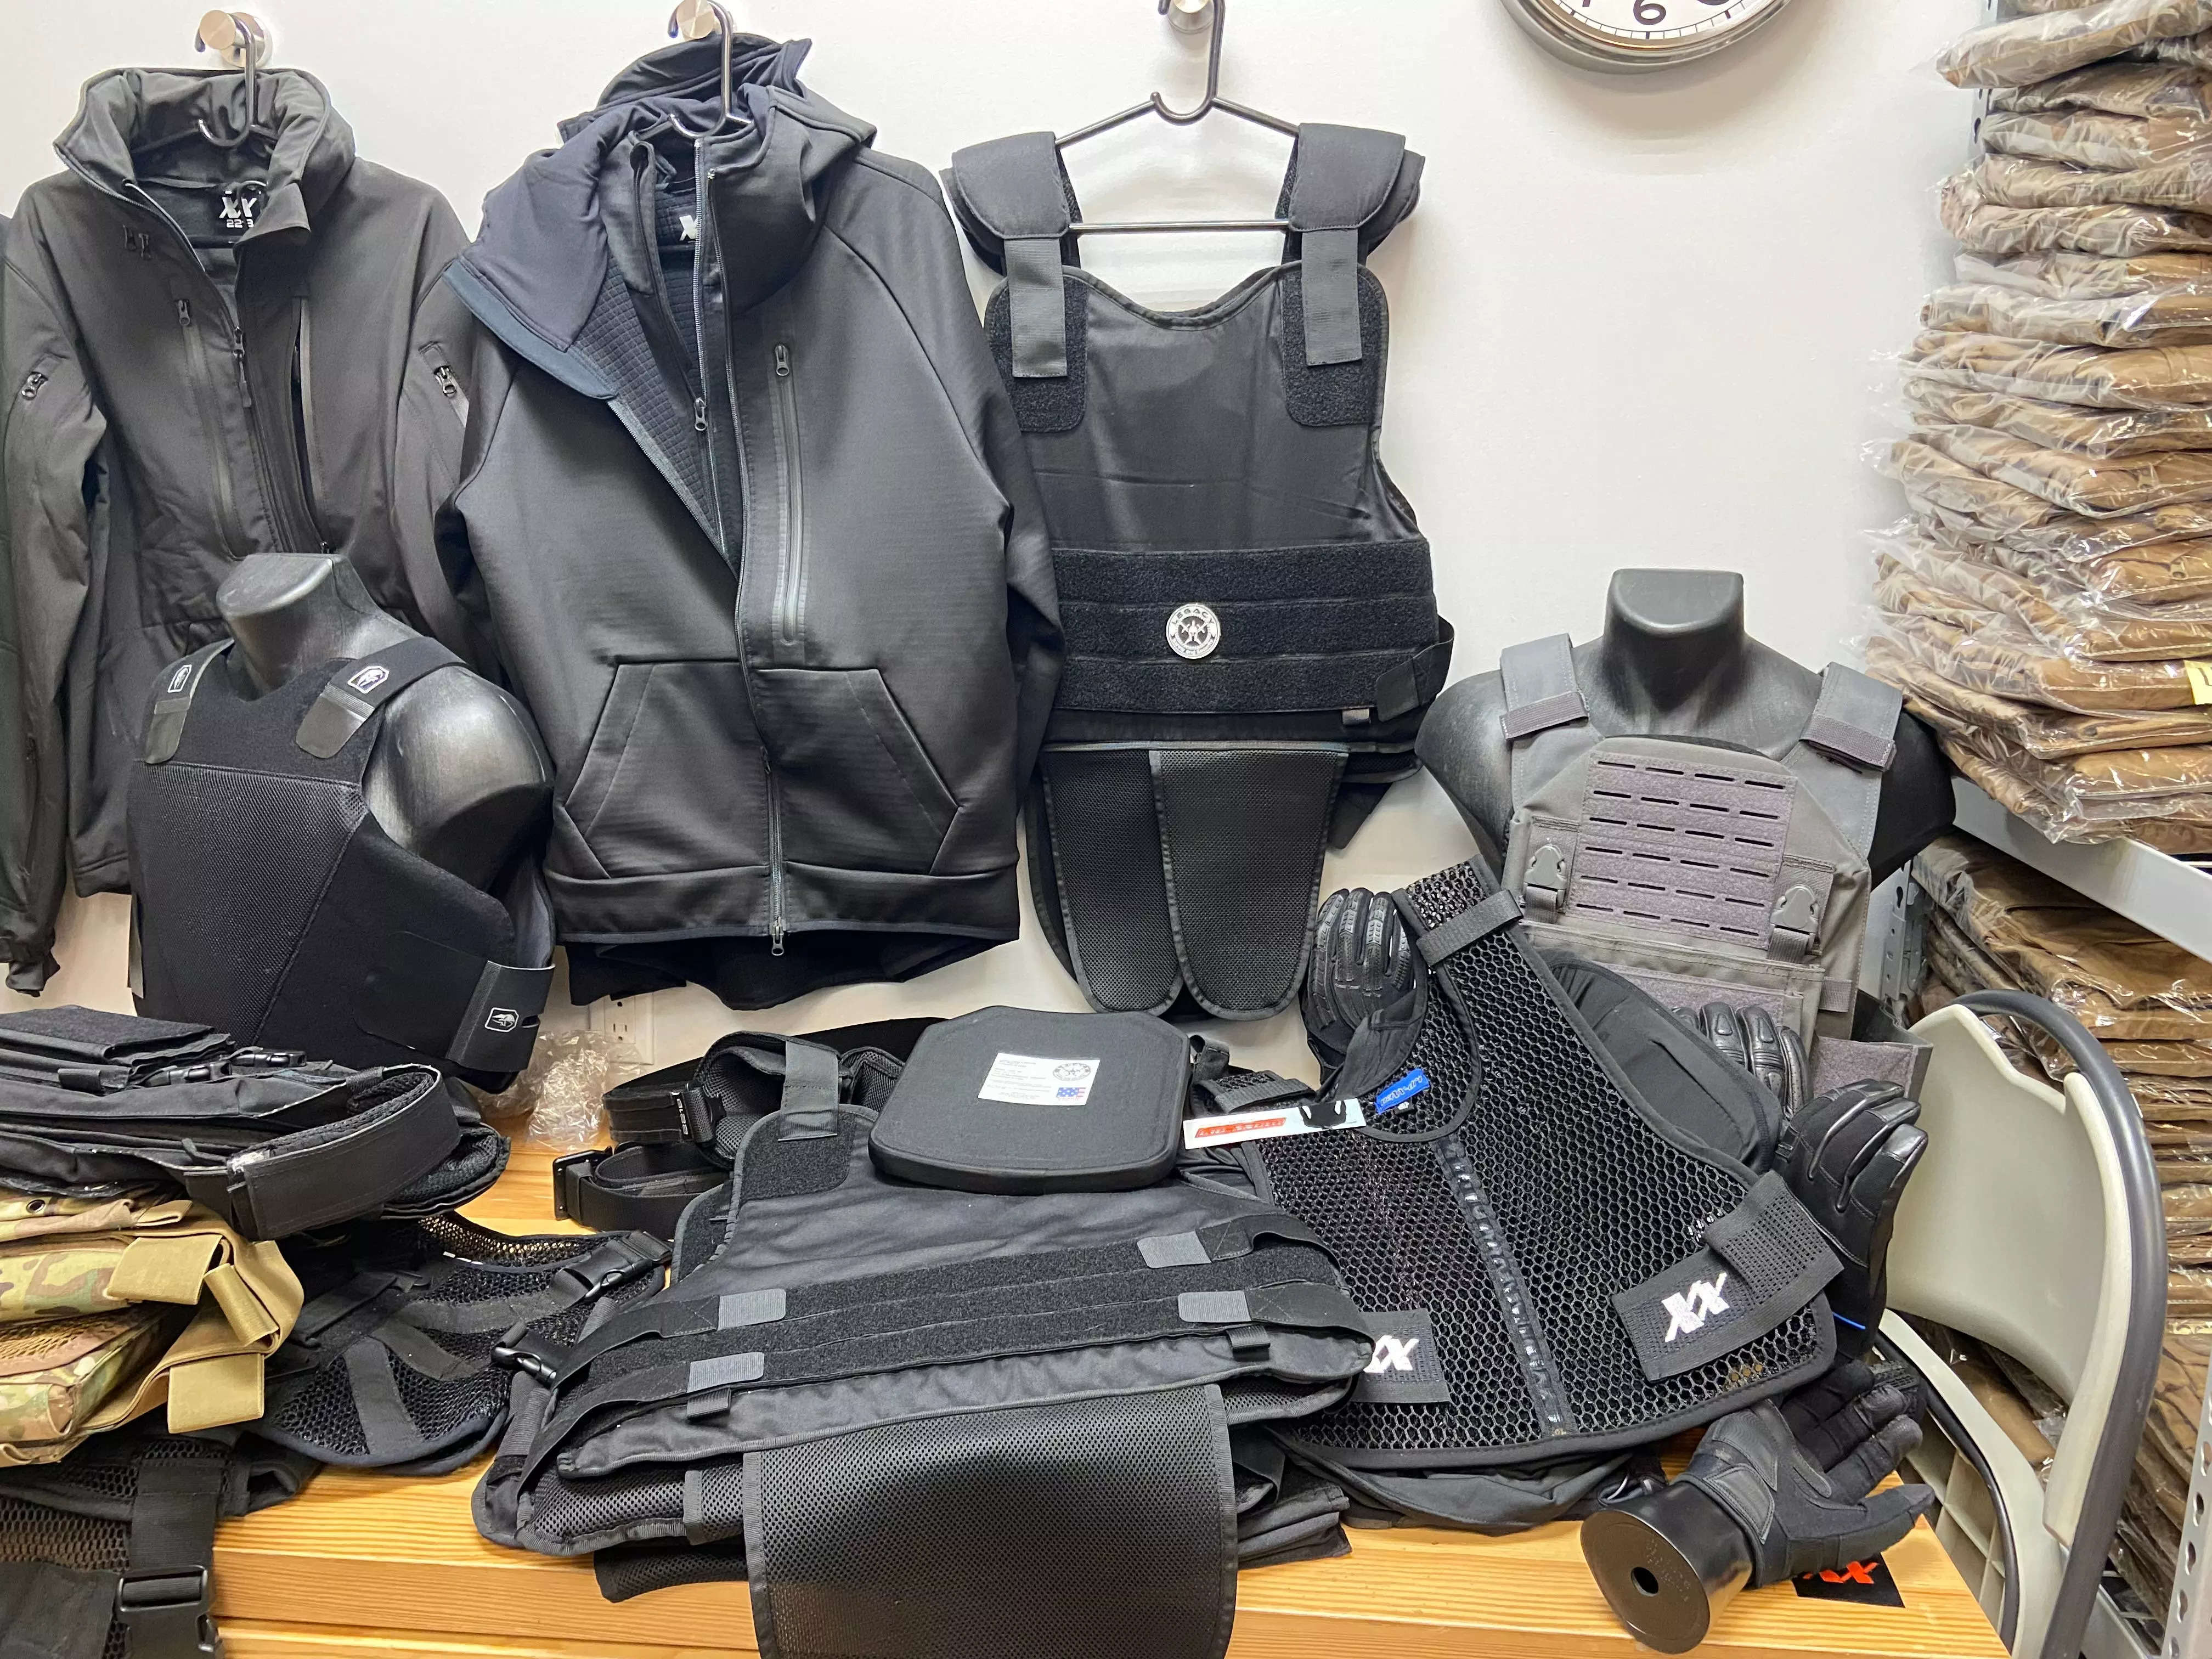 Black vests and other body armor accessories are seen displayed on a table and hanging above.